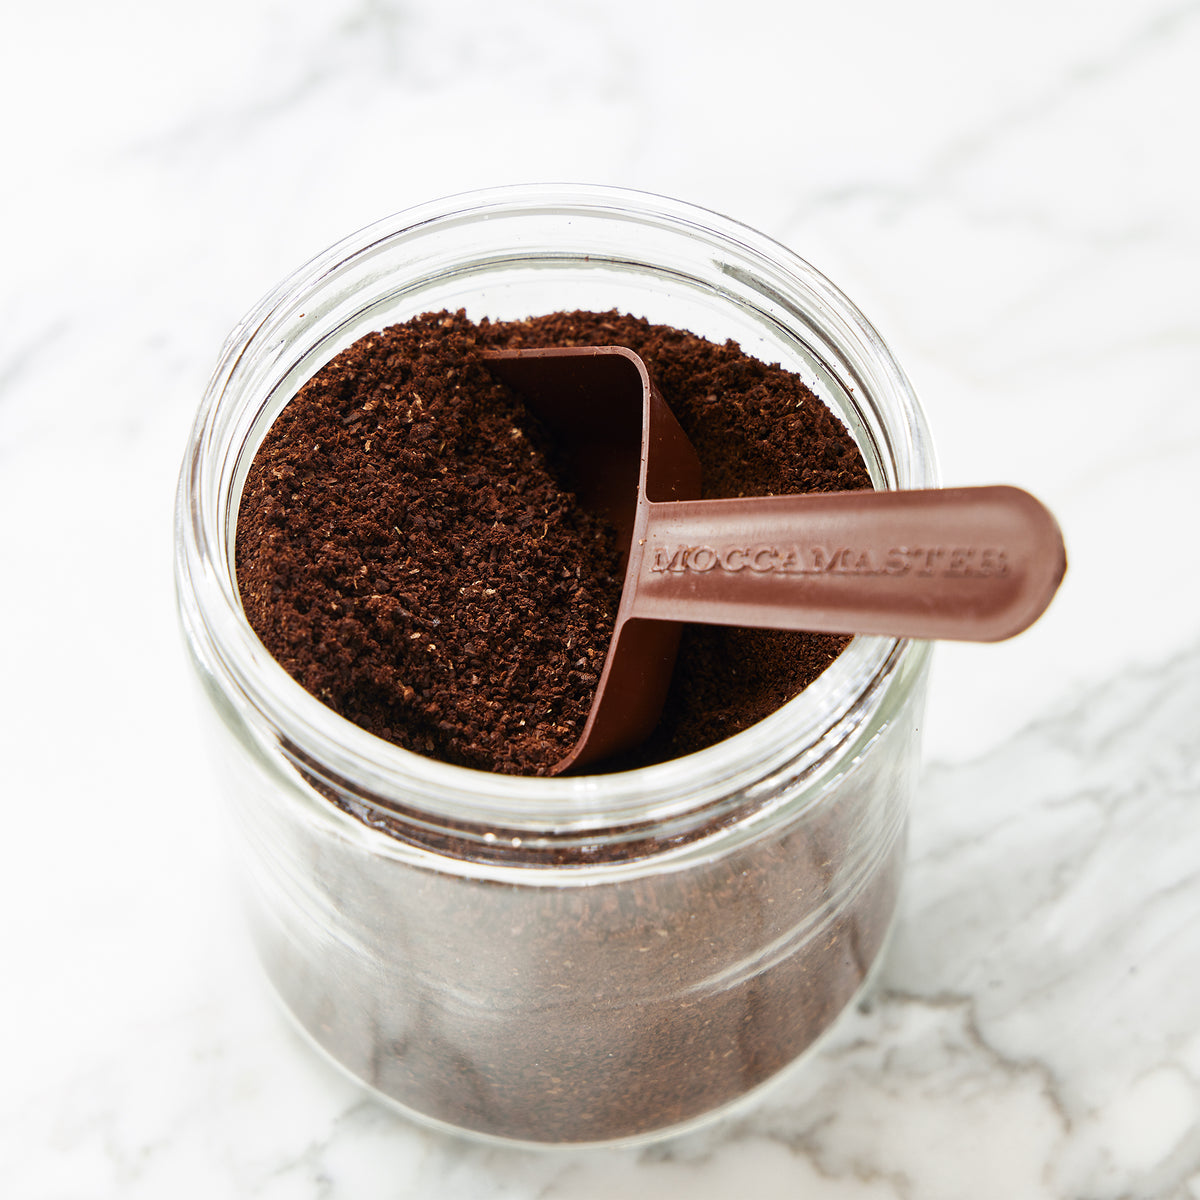 A brown 2-tablespoon Moccamaster coffee scoop inside a glass jar full of coffee grounds.